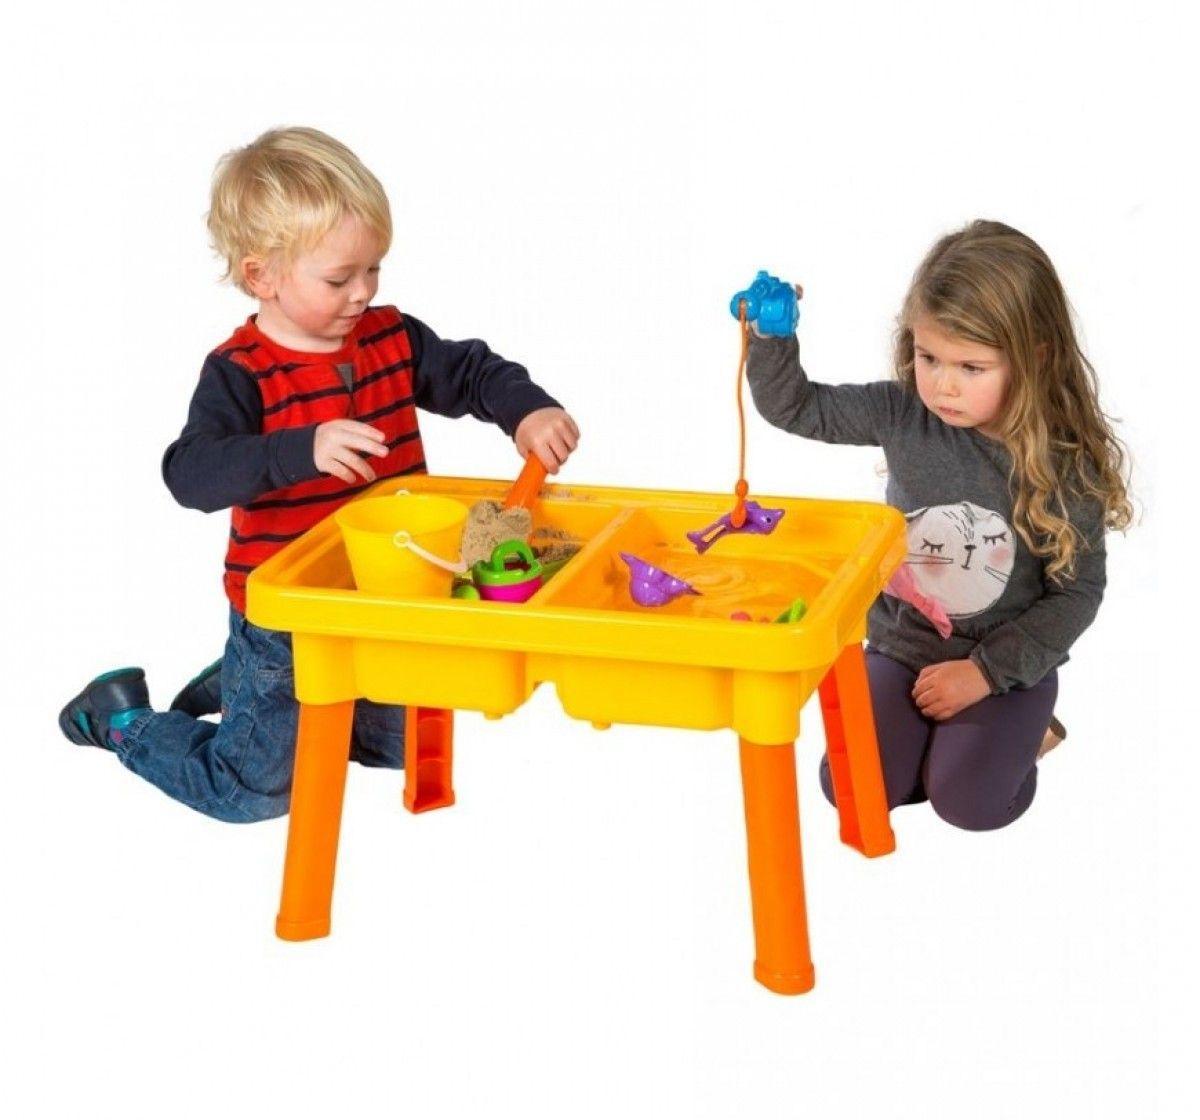 "Bring Double Fun to Your Backyard with the Double Play Sand & Water Table" - 4aKid